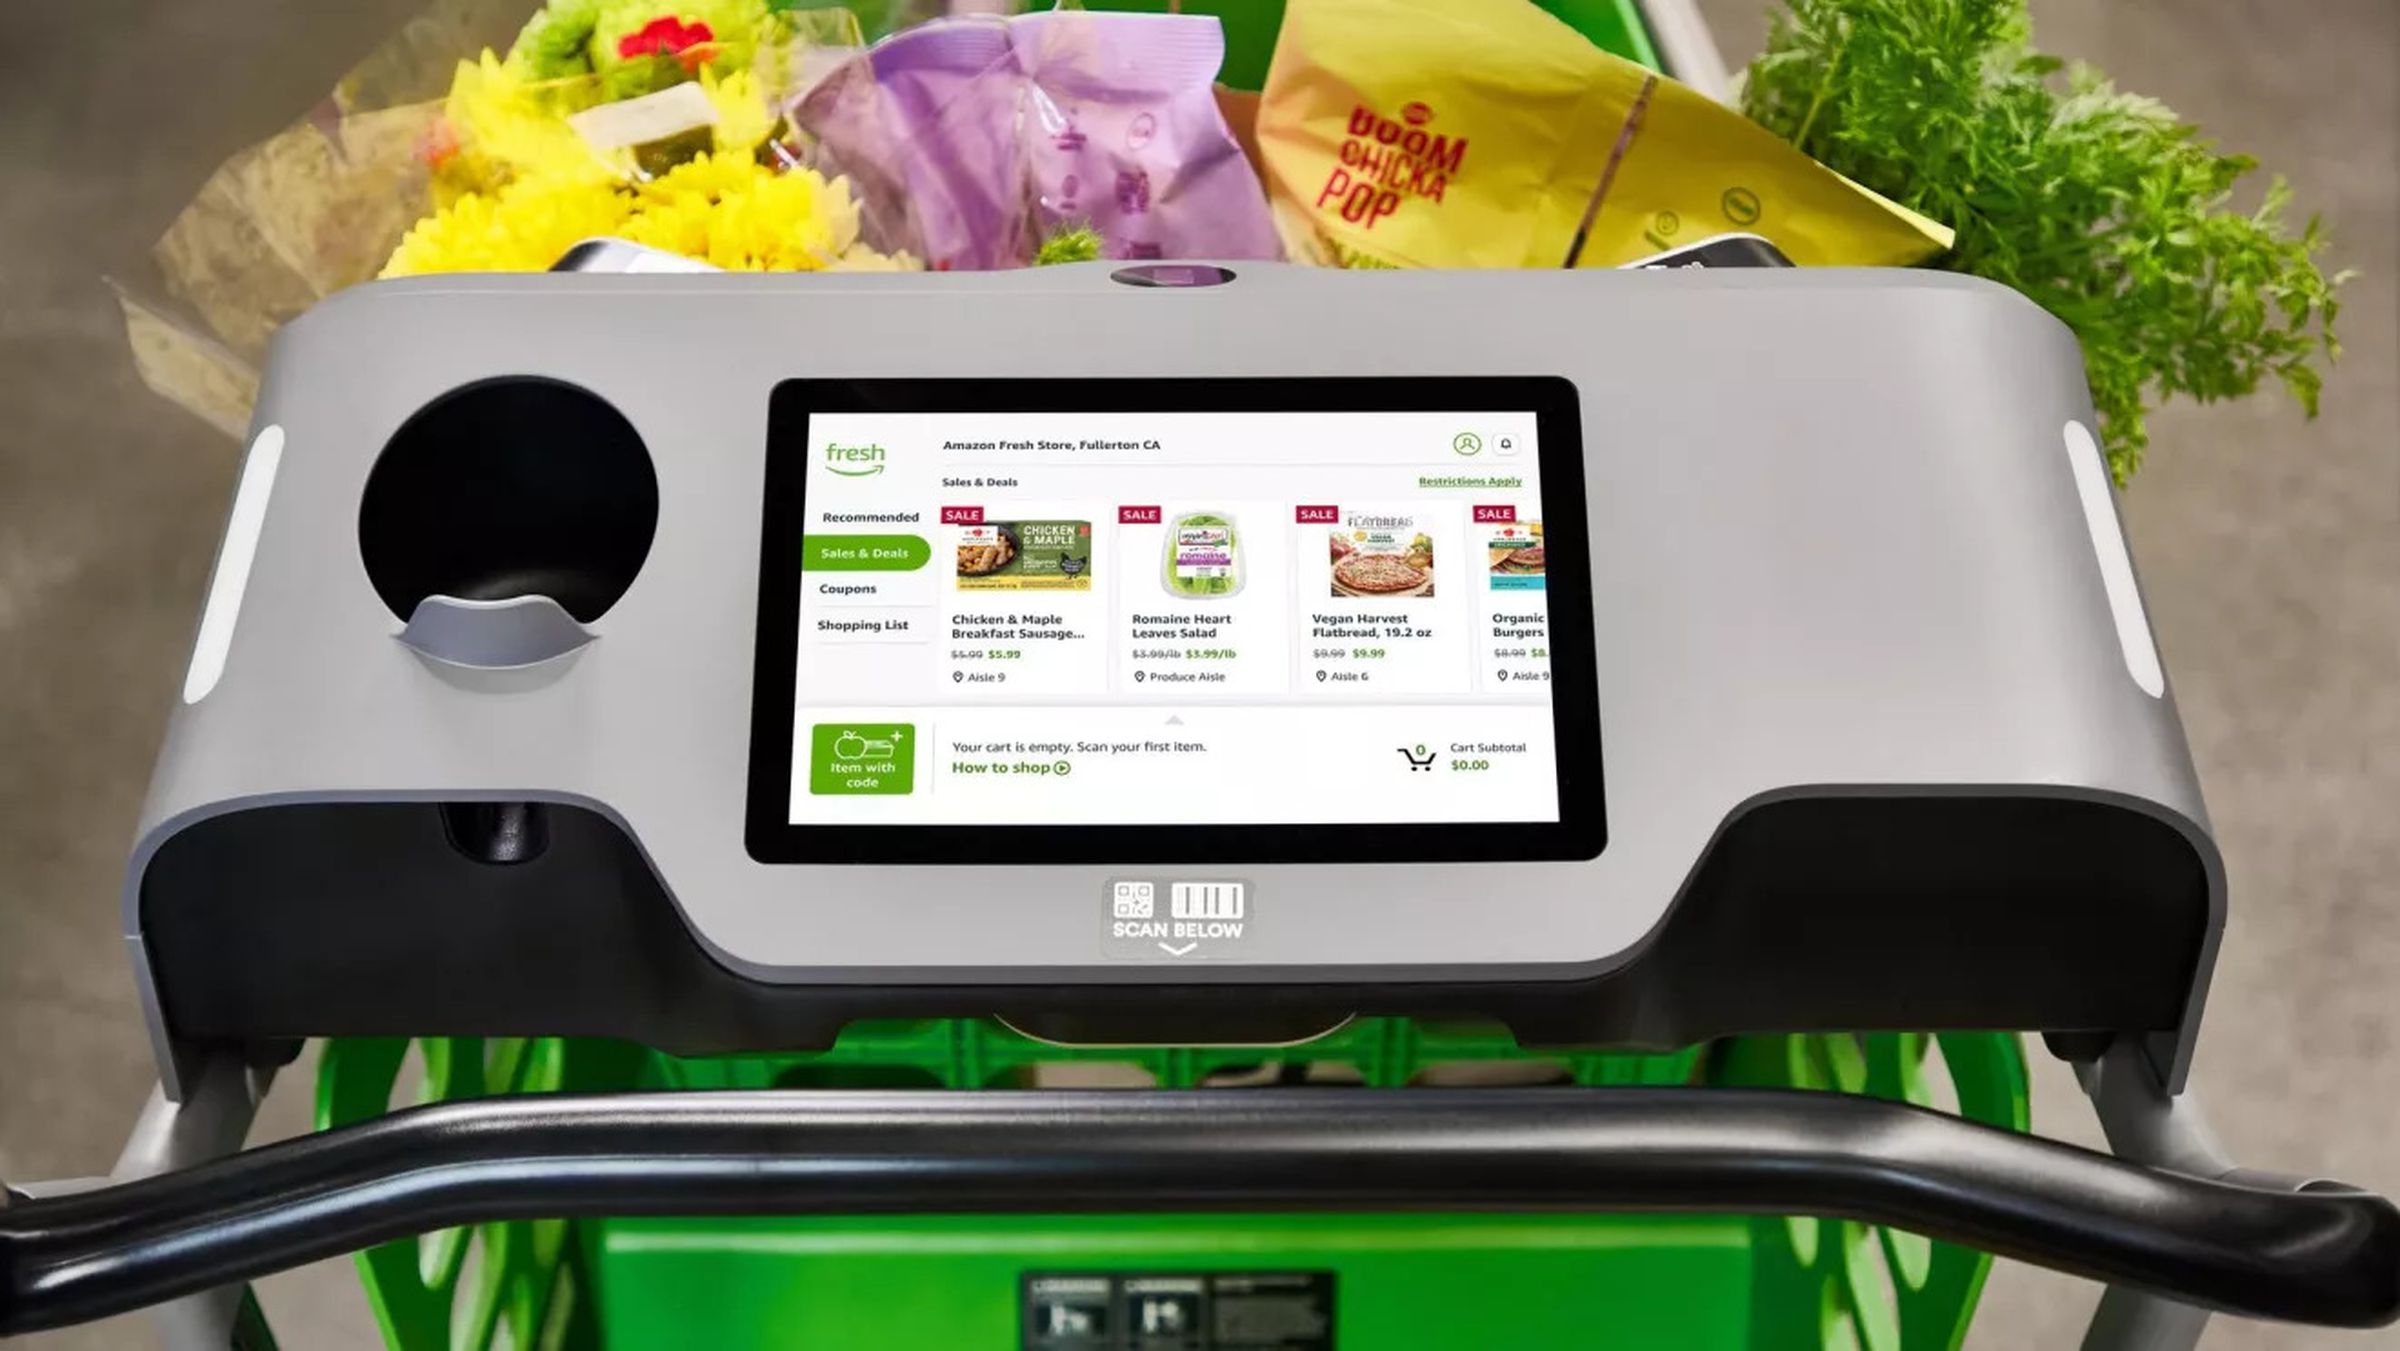 Amazon confirms that its Dash cart is more popular in larger stores.